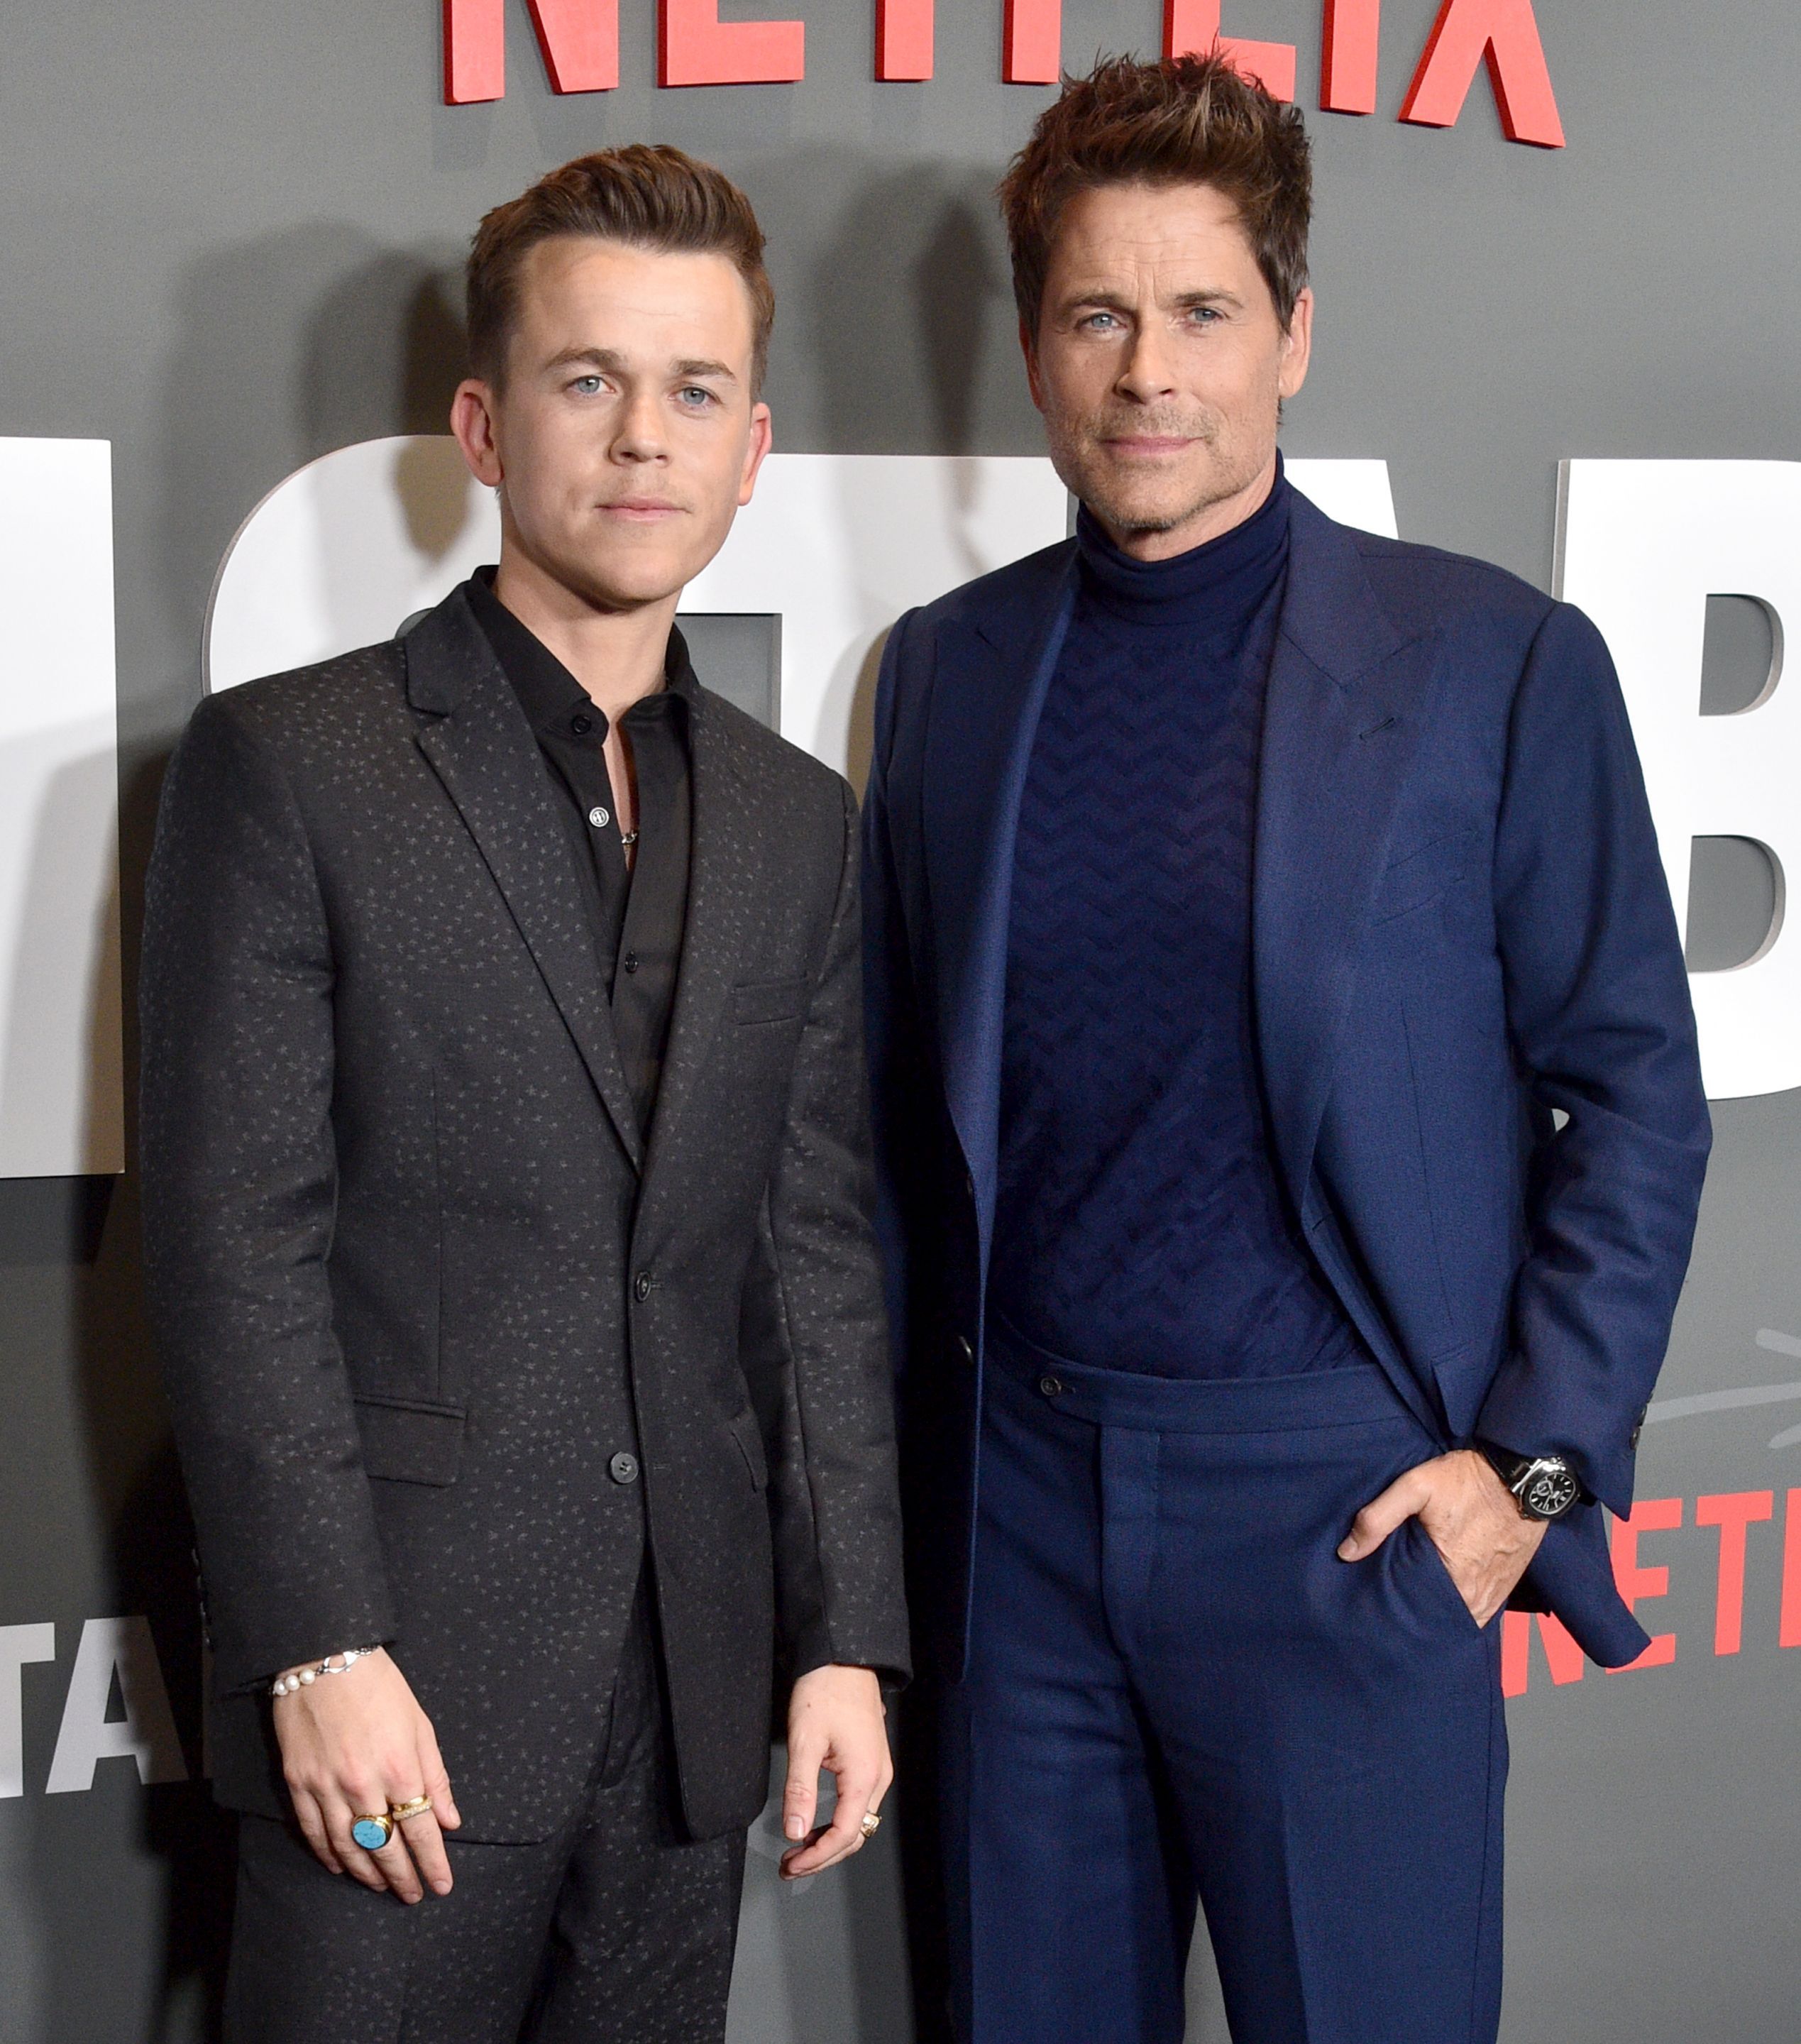 Rob Lowe on Working With Son John Owen Lowe on Netflix's 'Unstable